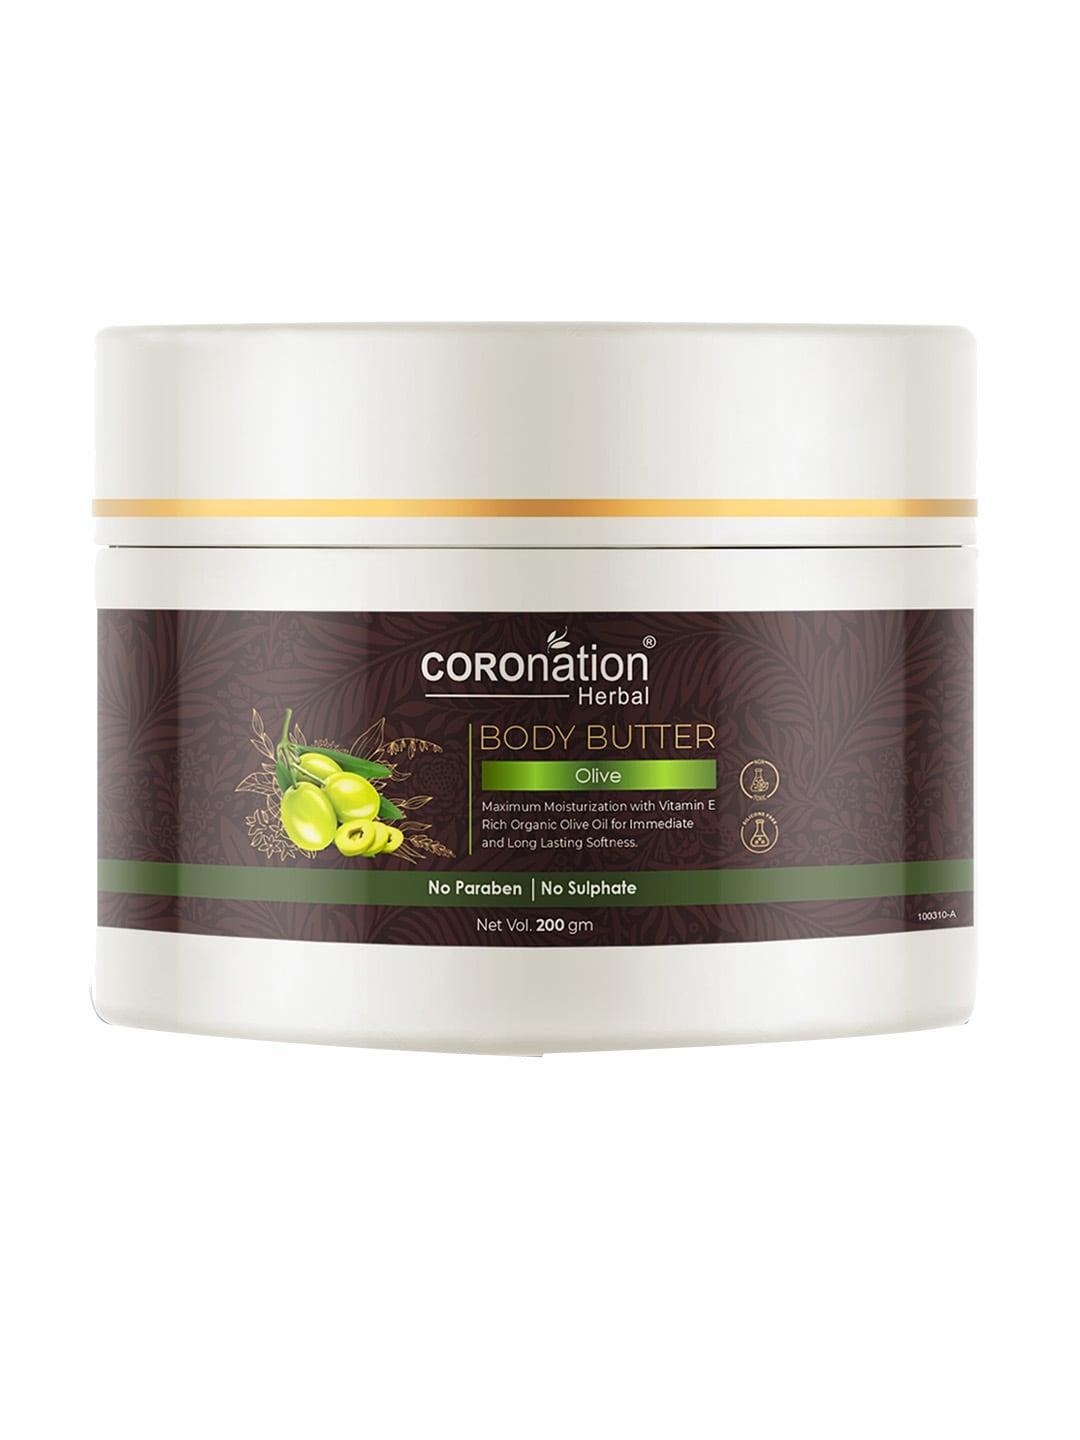 COROnation Herbal Olive Body Butter Body Lotion 200 gm